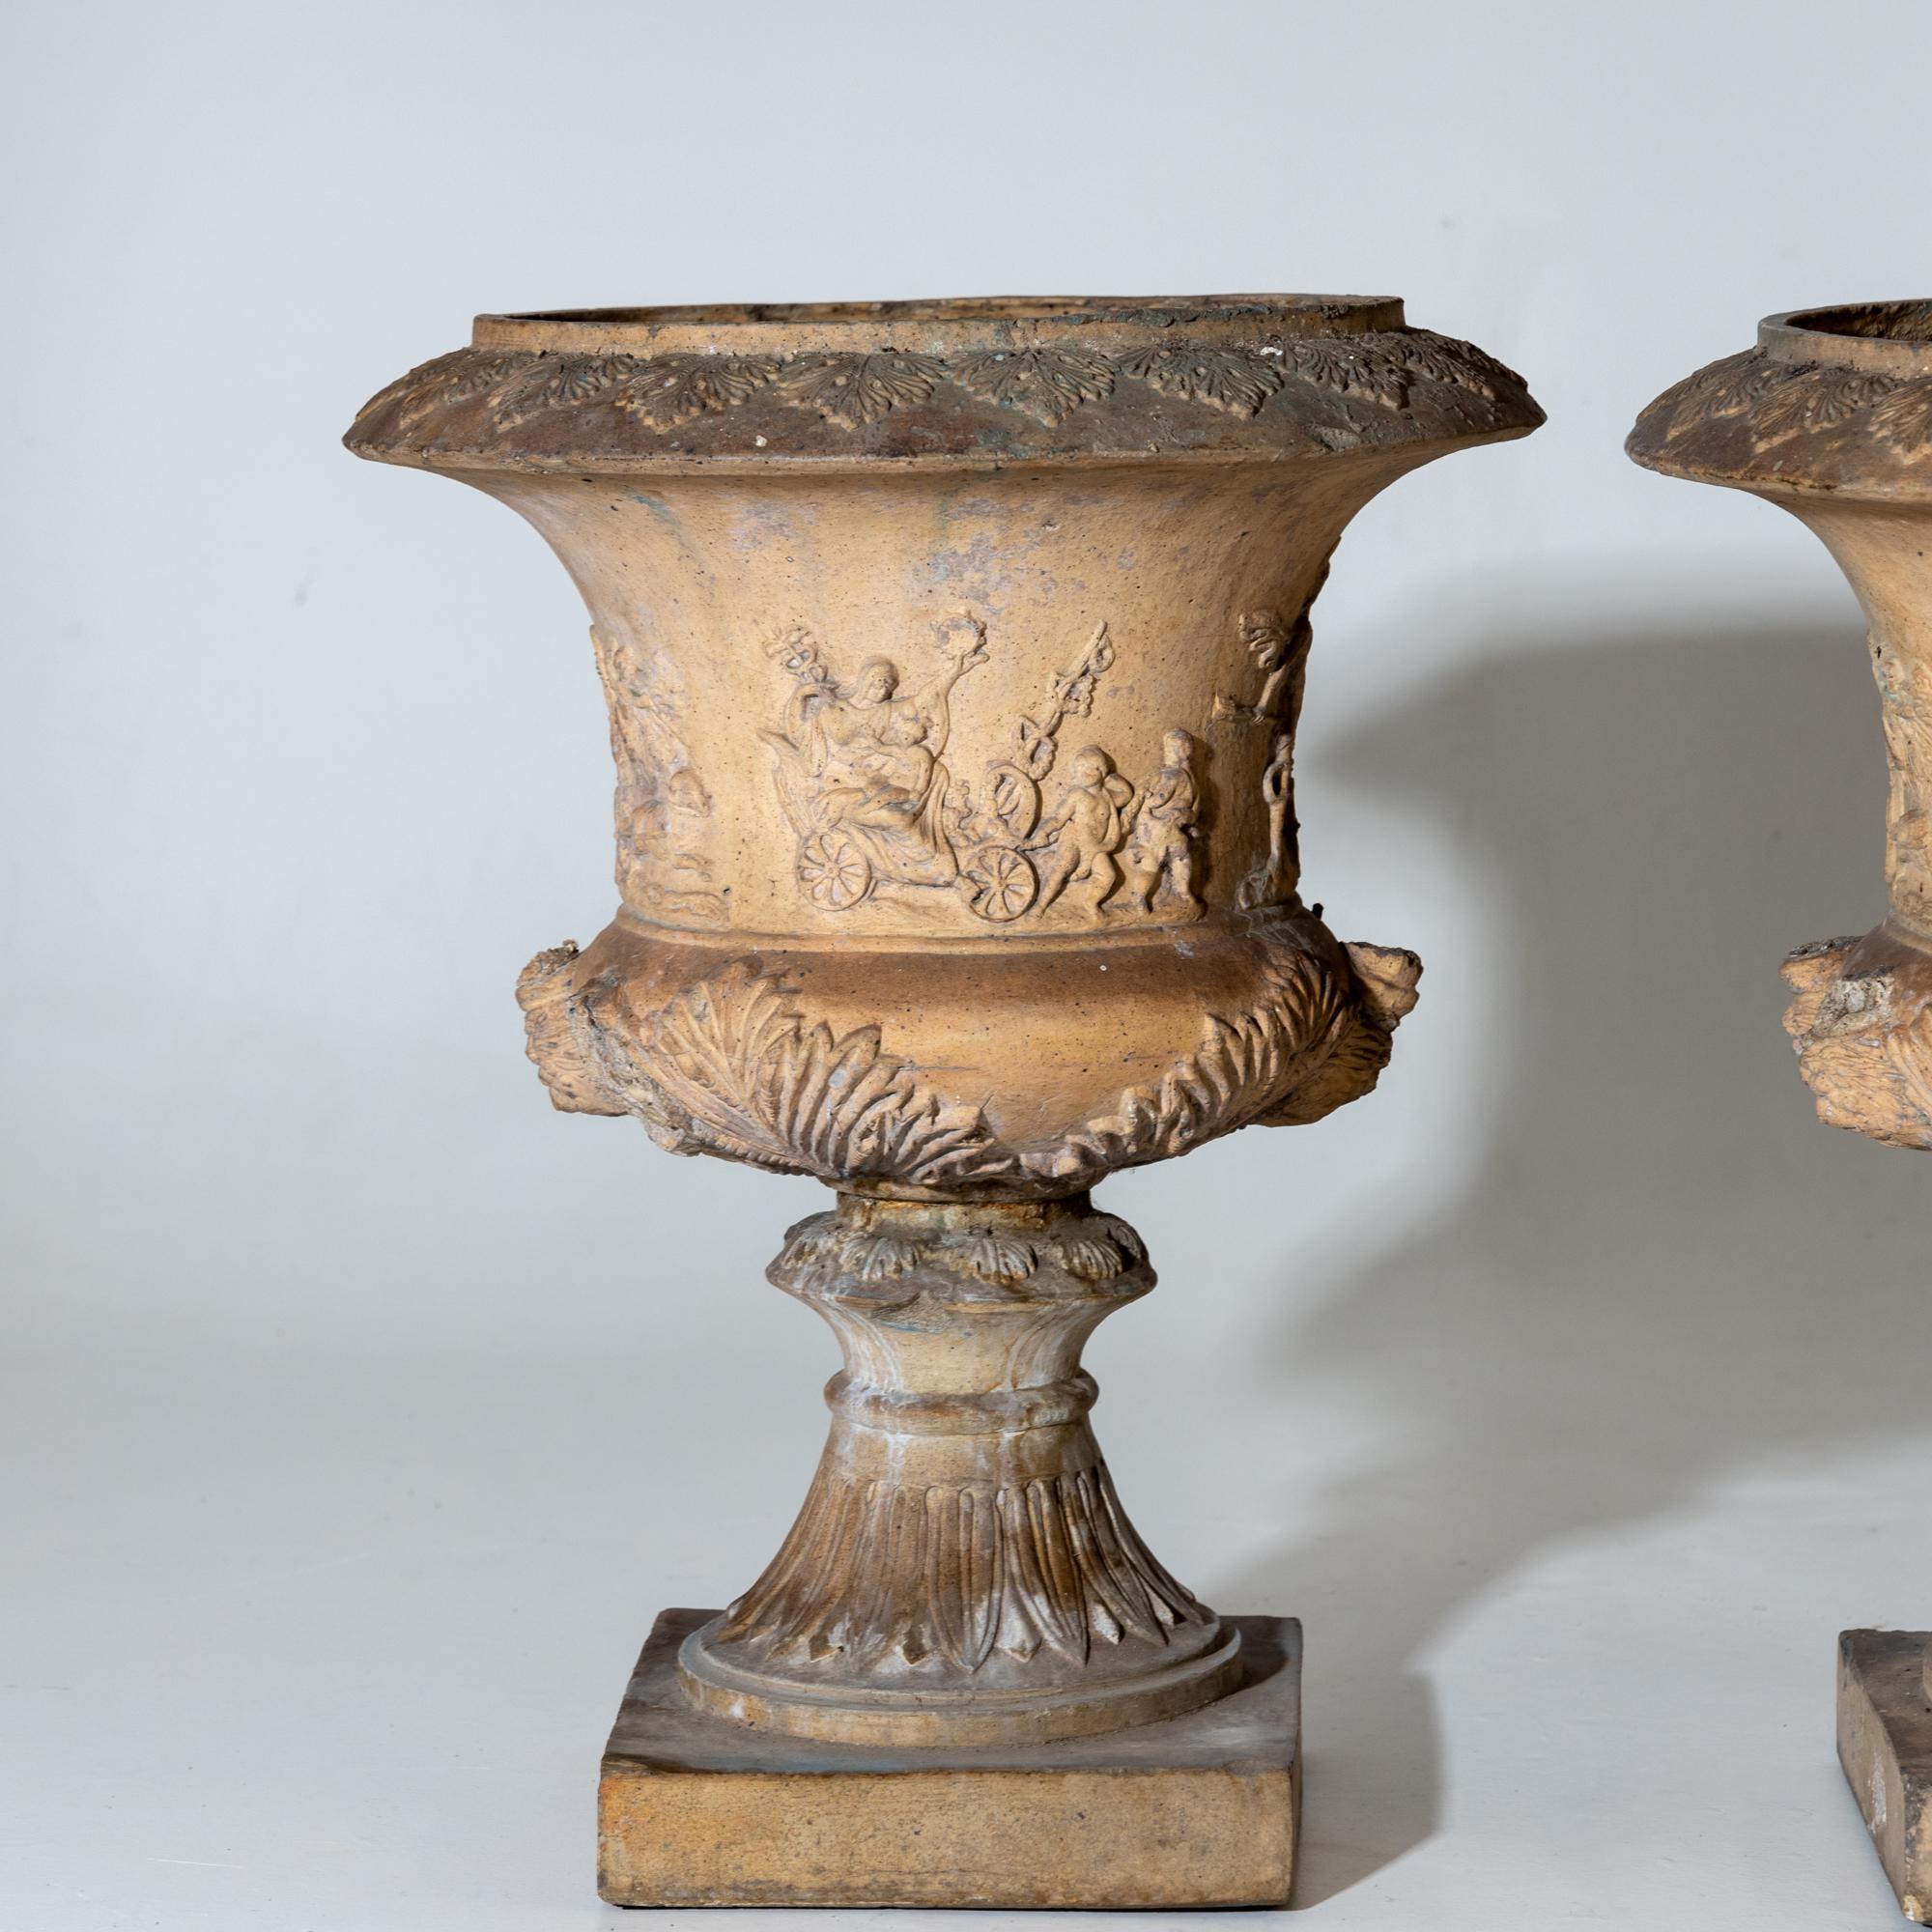 Pair of crater vases in the classicist style with figural scenes on the wall and square plinth. The vases are also decorated with acanthus leaves on the belly and on the rim. The side handles are missing and one vase has a crack. Signs of age and